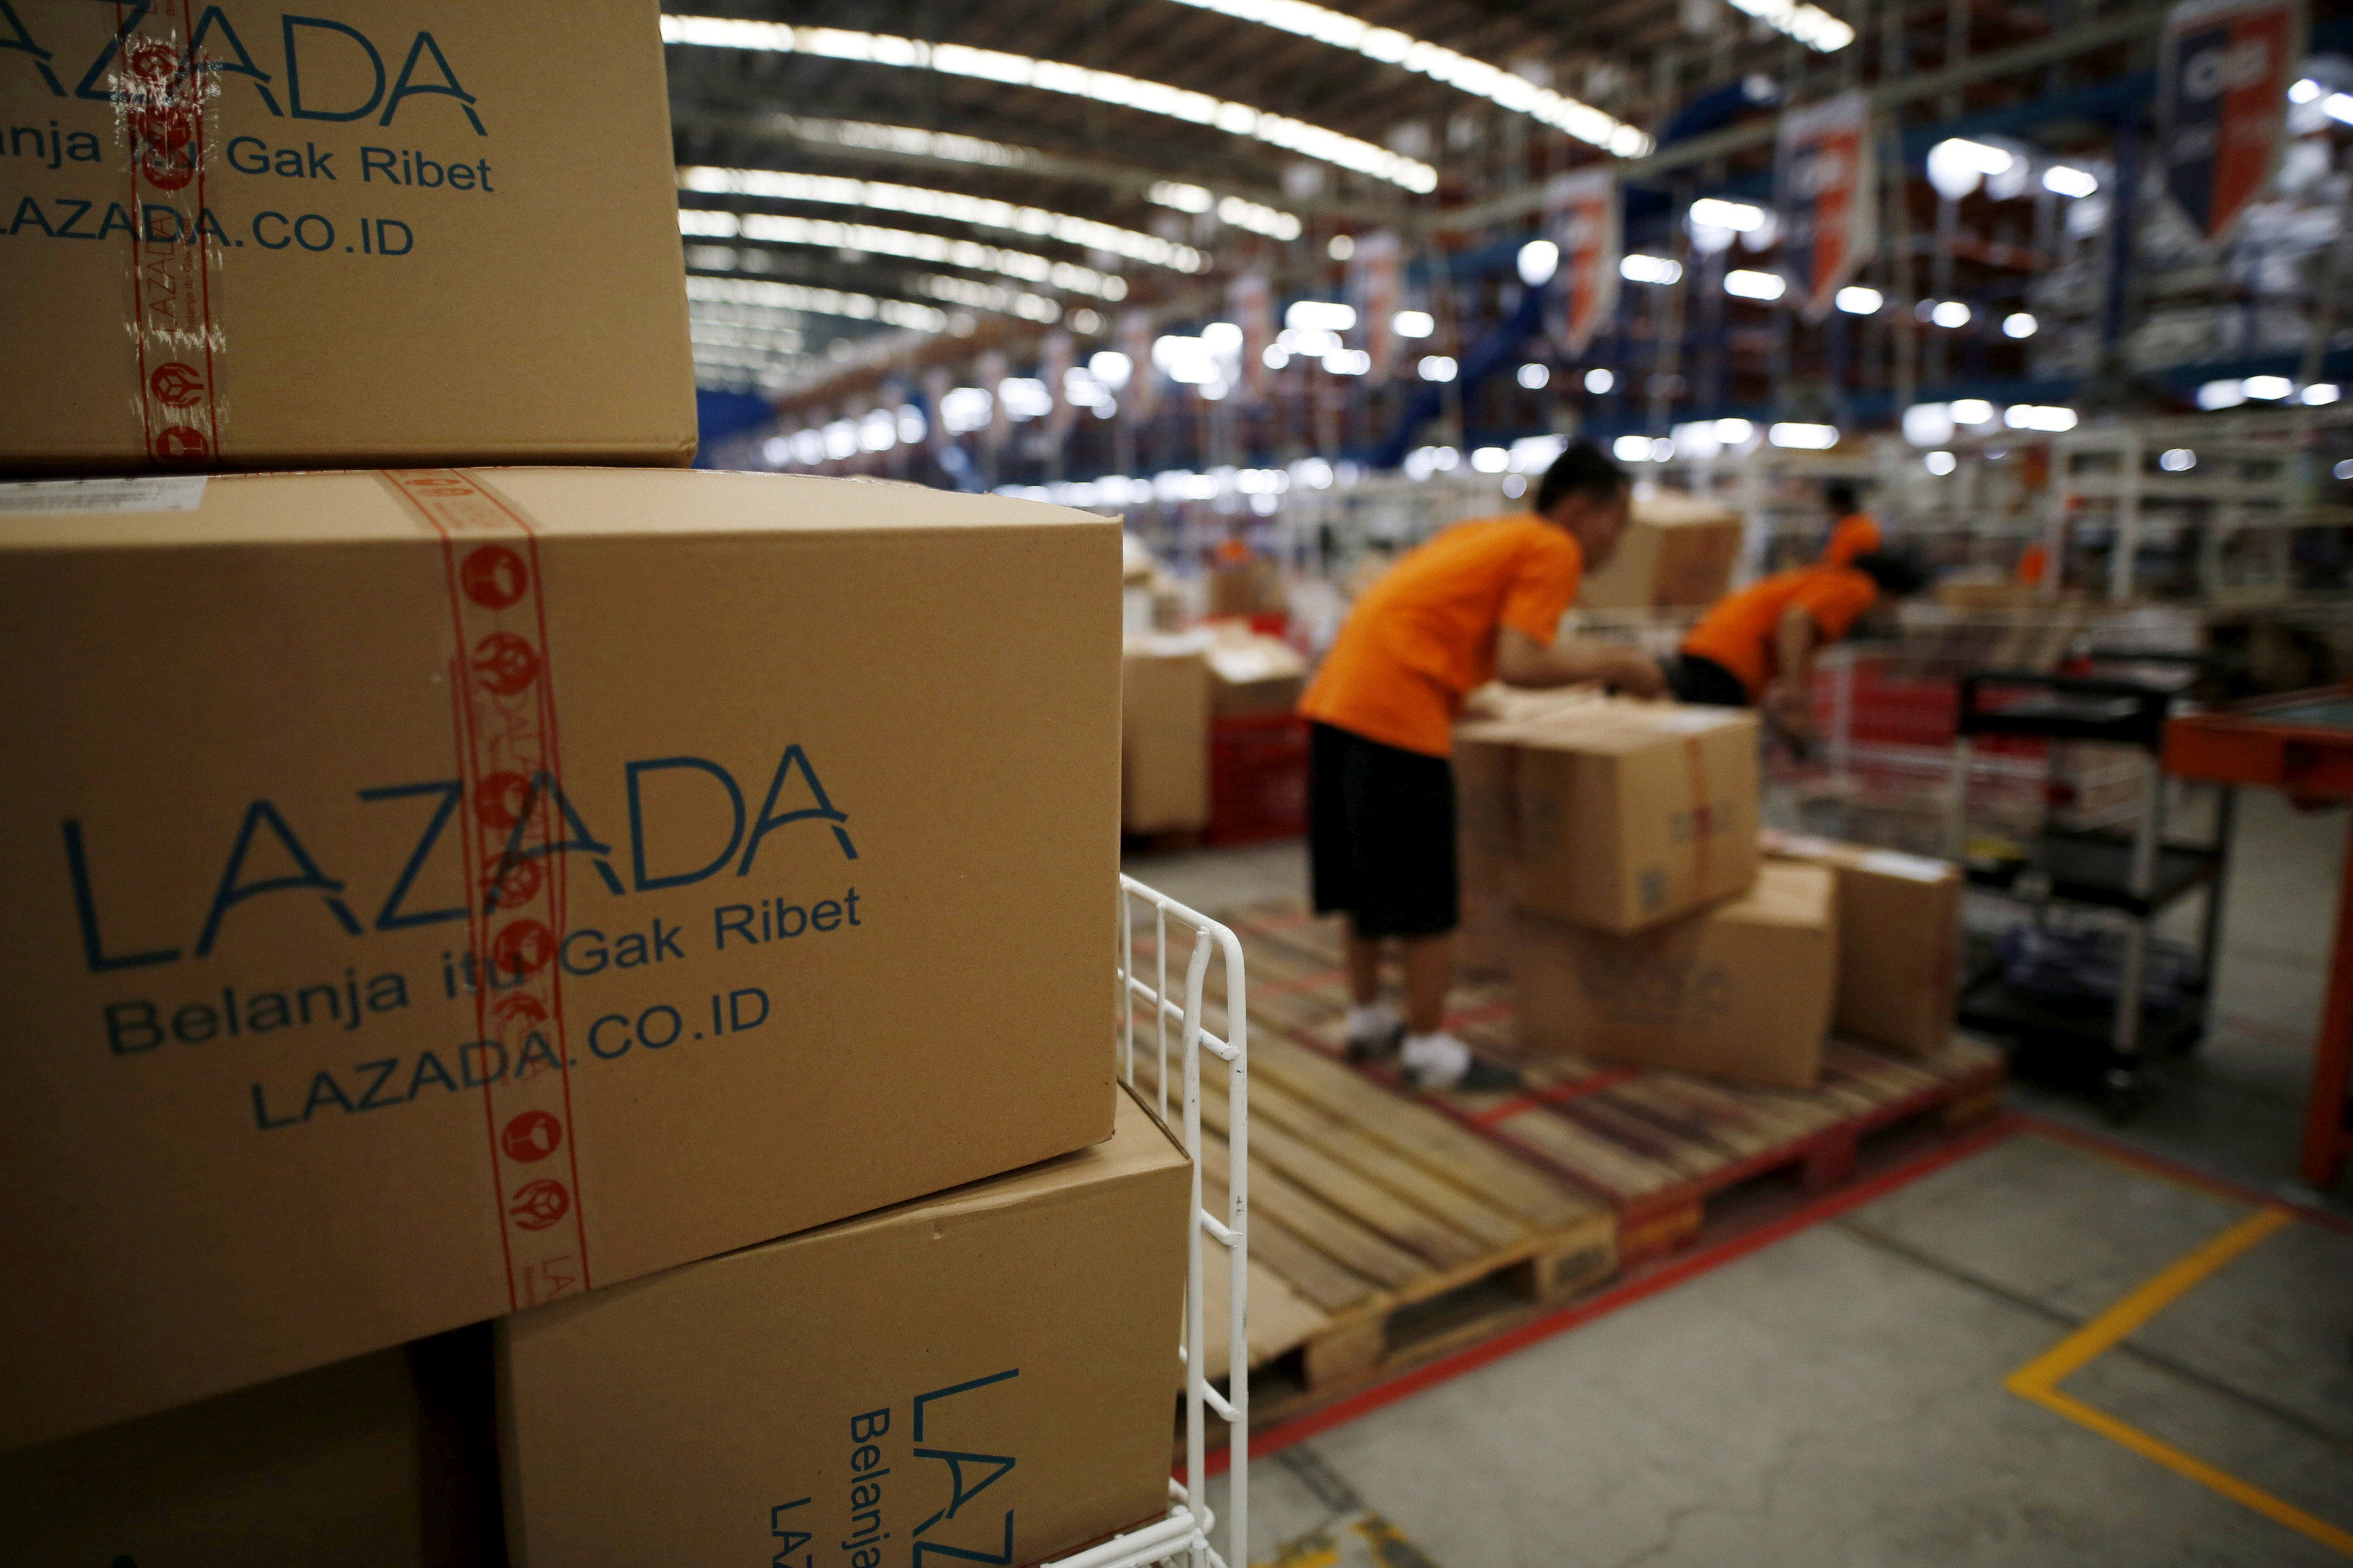 Lazada employees fill orders at the company’s warehouse in Jakarta. File photo: Reuters